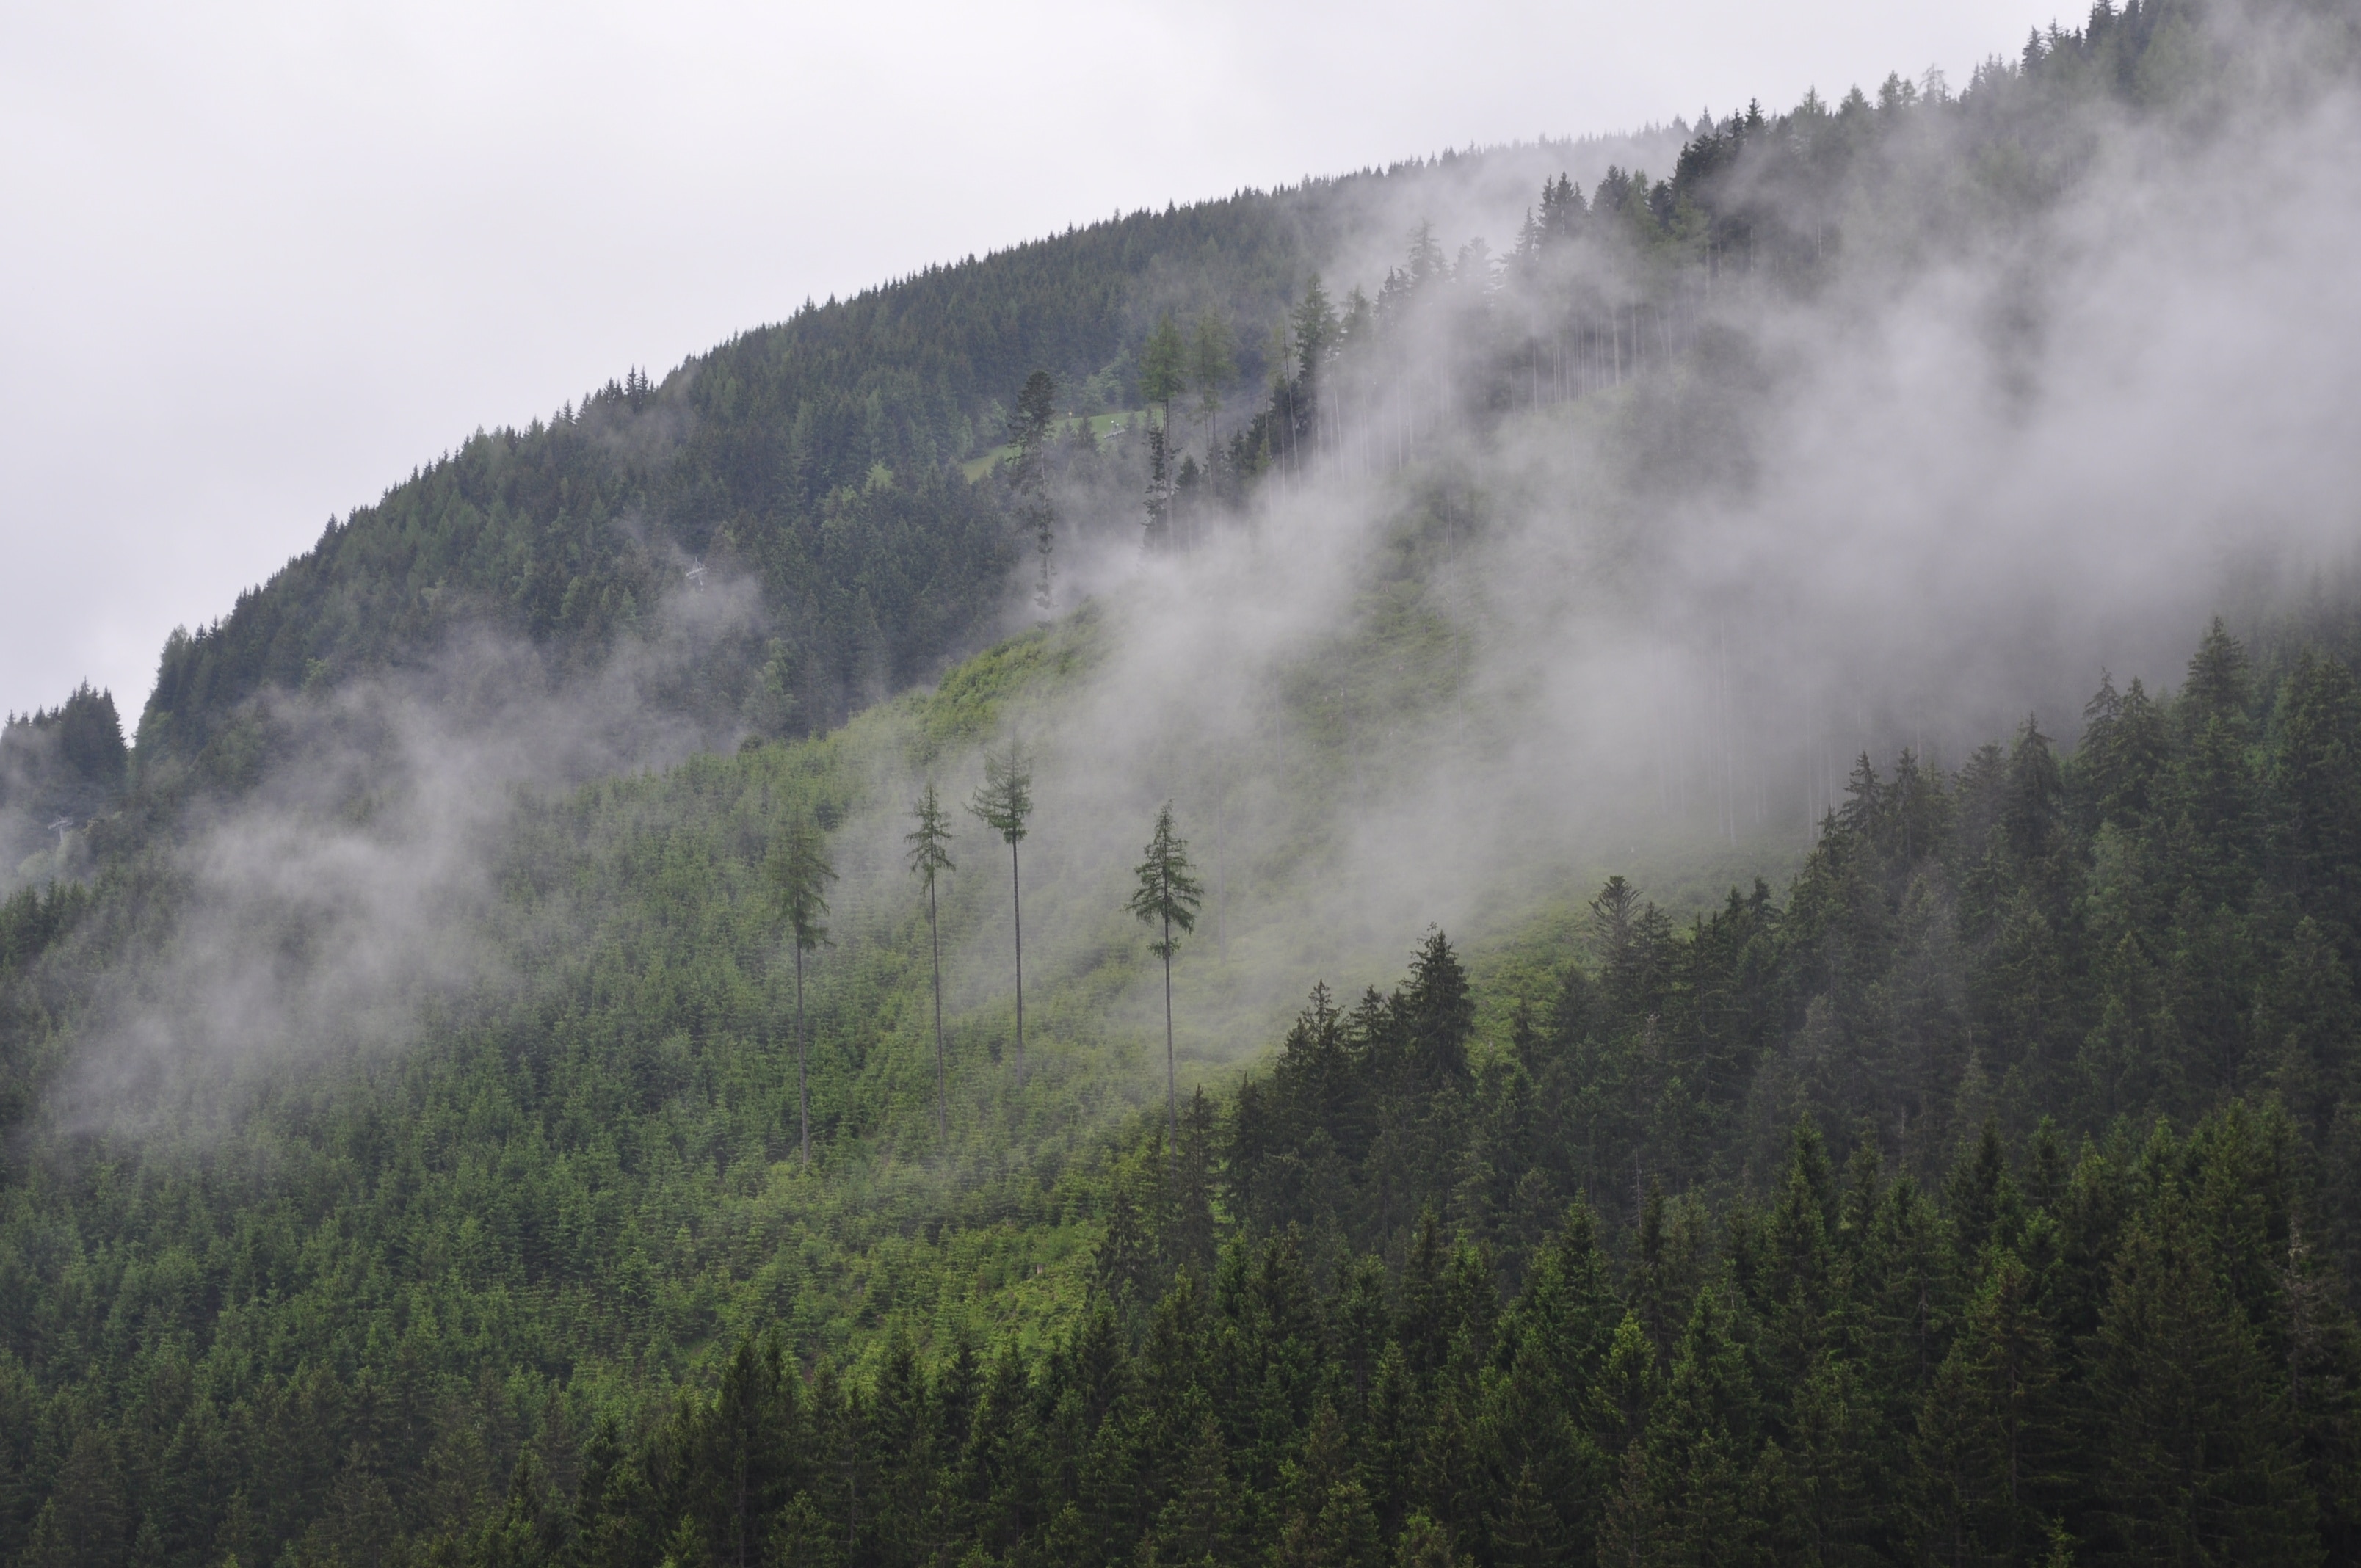 green pine trees surrounded by fogs